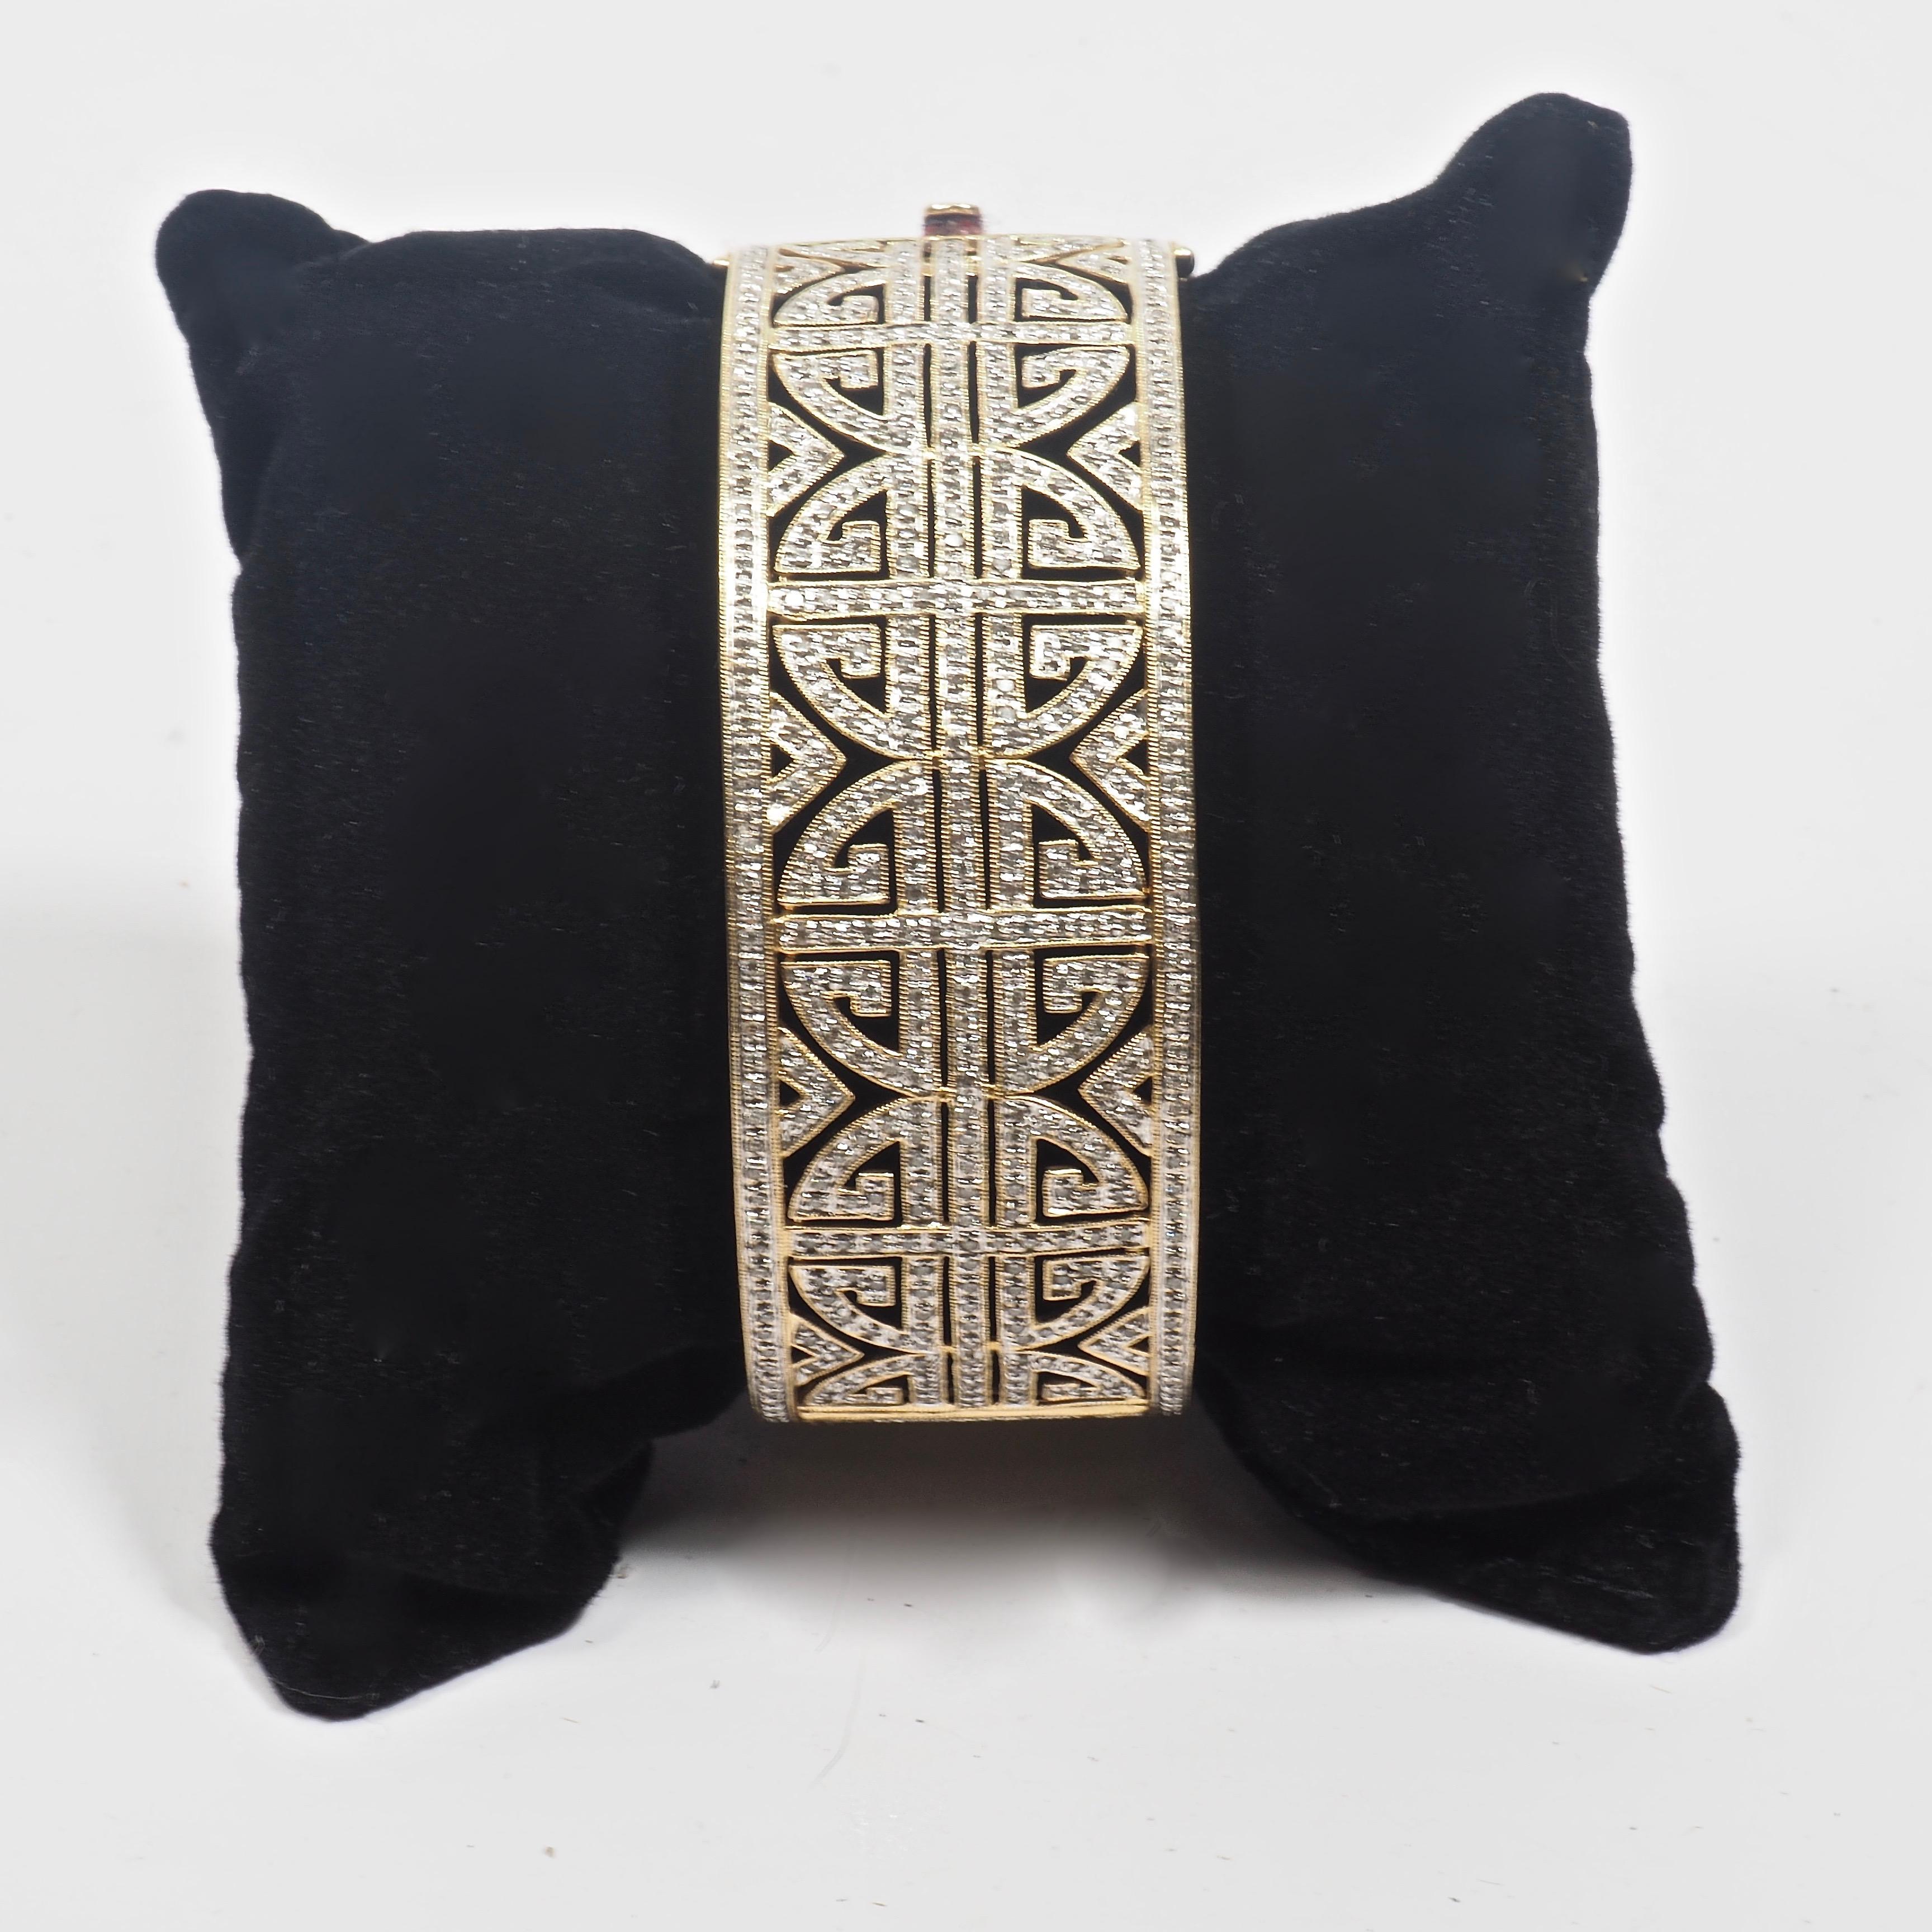 Superb 14 karat yellow gold and diamond fretwork geometric bangle. The bracelet is set with 516 round cut diamonds in an interlocking Chinese emblem pattern symbolising prosperity and good luck. 5 ct. Diamonds rated SI clarity and H-I colour.